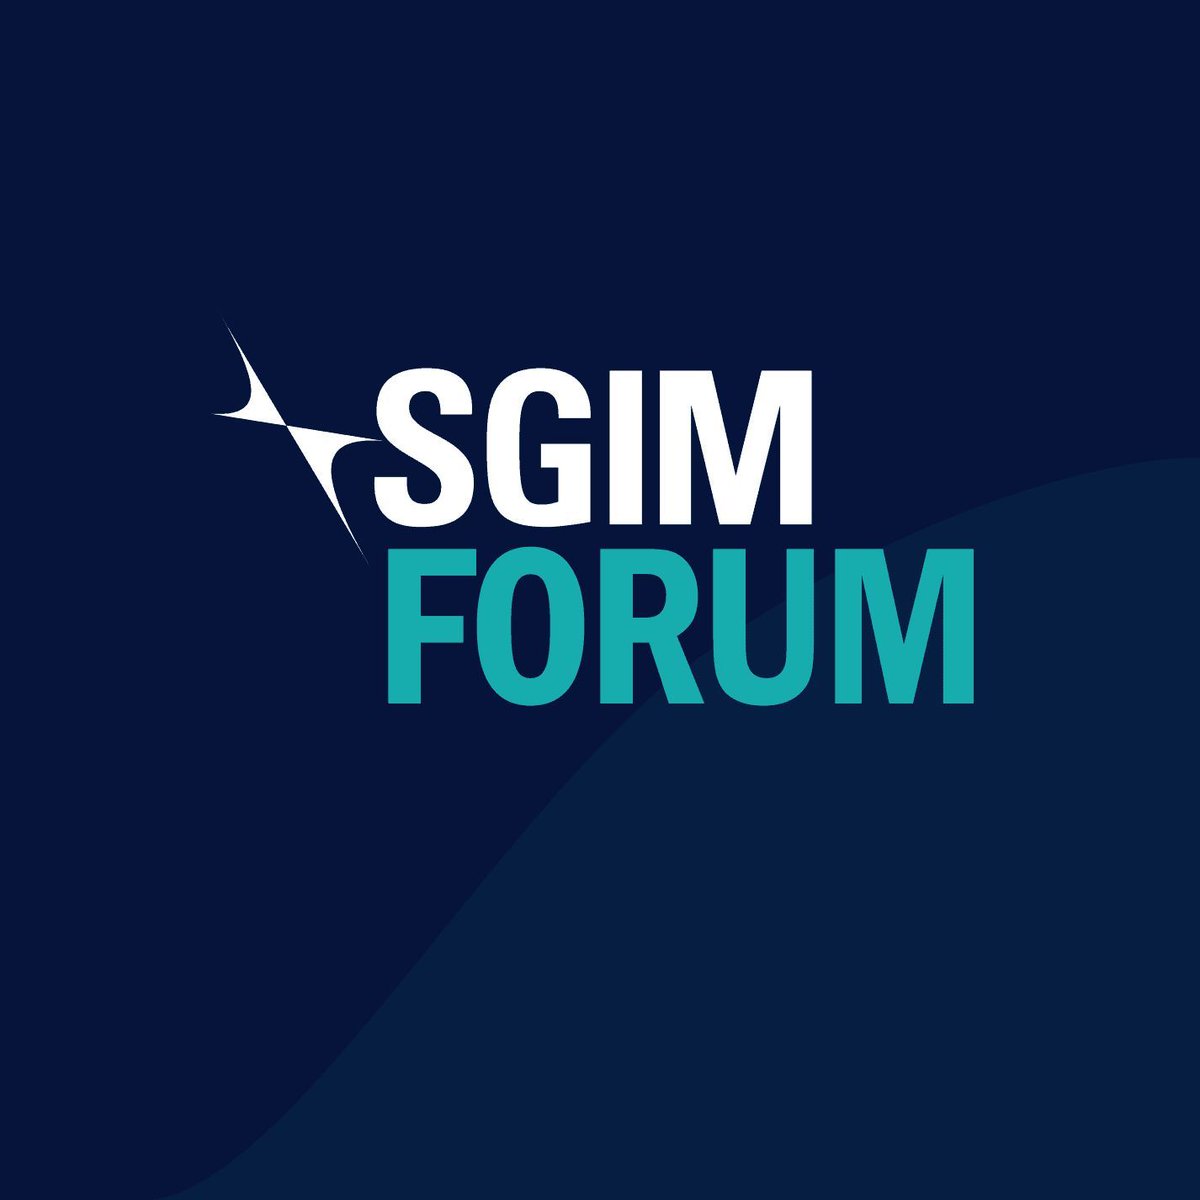 Are you a student, resident, or fellow attending #SGIM24? Start planning today with this overview of what to expect at the Annual Meeting! @SaraASpinella @mnmetzinger buff.ly/4aWoTo4 For more information, check out our #SGFGuide! buff.ly/4aUKQUF